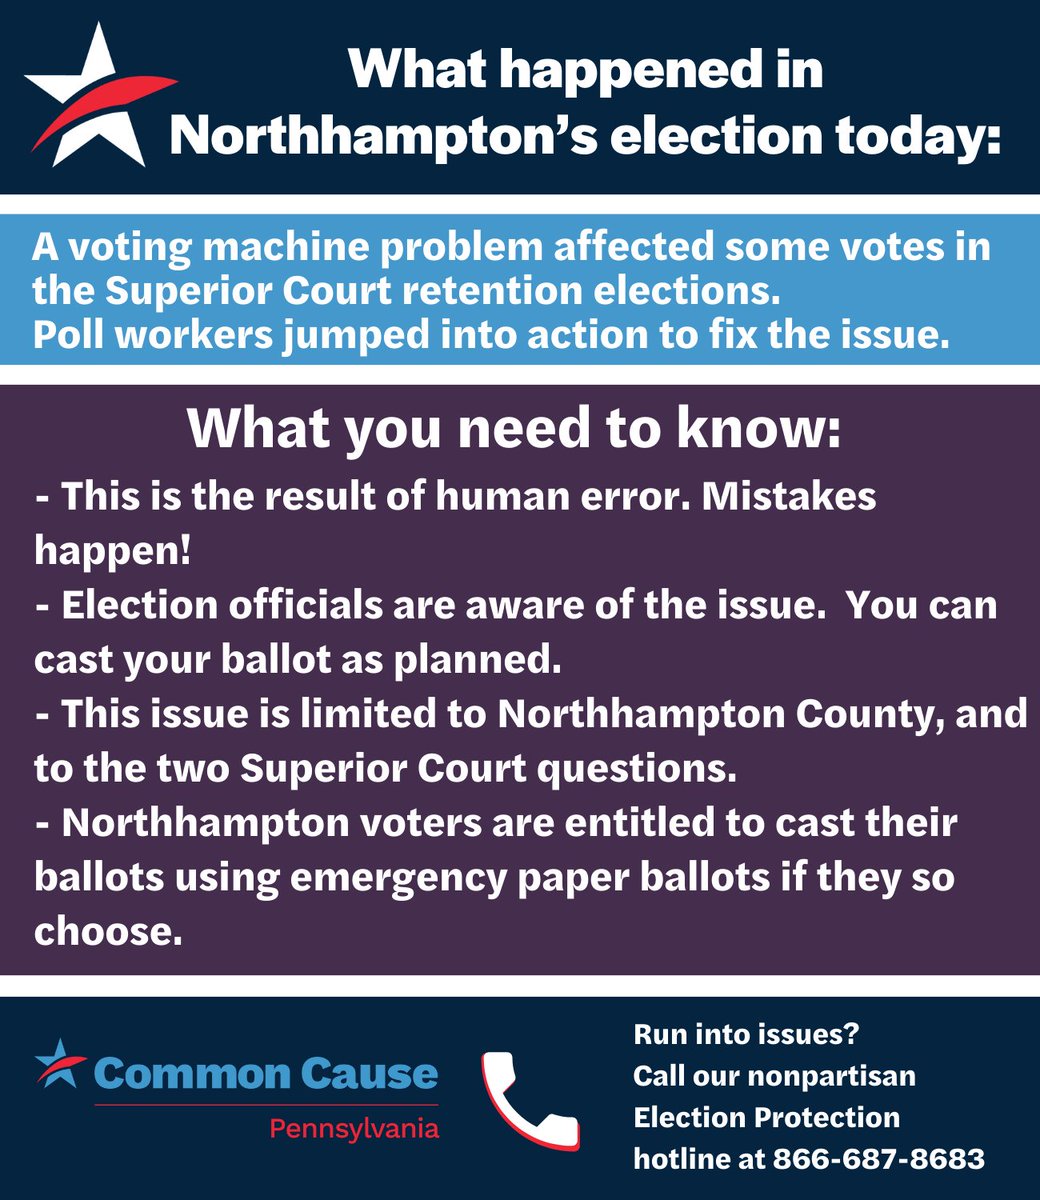 You may have heard that there were some voting machine issues in #Northhampton today. These issues impacted 2 retention elections for Superior Court judges. Some voters who voted “YES” for one judge and “NO” for the other had their votes misrecorded. Here’s what you need to know: